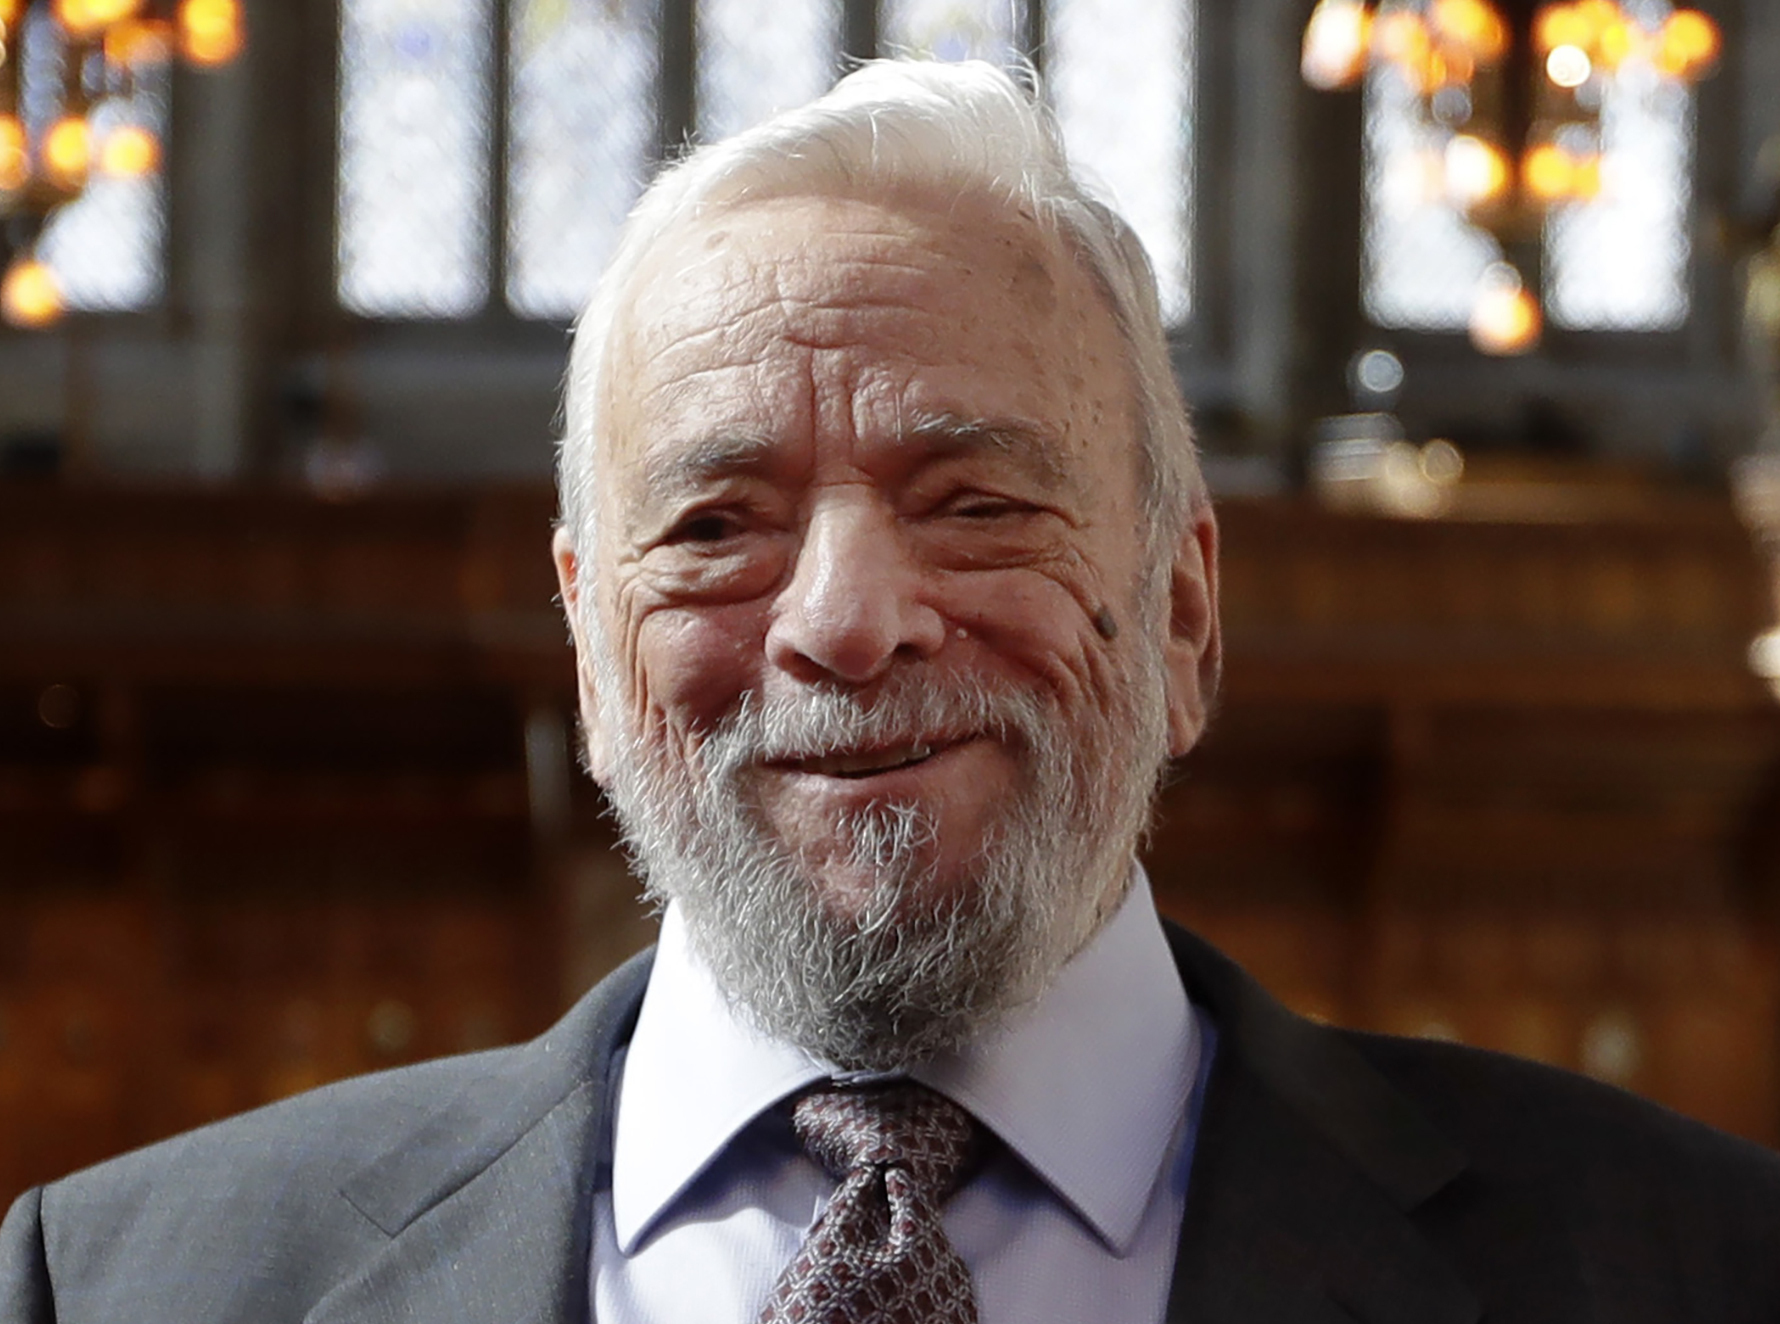 FILE - Composer and lyricist Stephen Sondheim poses after being awarded the Freedom of the City of London at a ceremony at the Guildhall in London, on Sept. 27, 2018. Sondheim, the songwriter who reshaped the American musical theater in the second half of the 20th century, has died at age 91. Sondheim's death was announced by his Texas-based attorney, Rick Pappas, who told The New York Times the composer died Friday, Nov. 26, 2021, at his home in Roxbury, Conn. (AP Photo/Kirsty Wigglesworth, File)